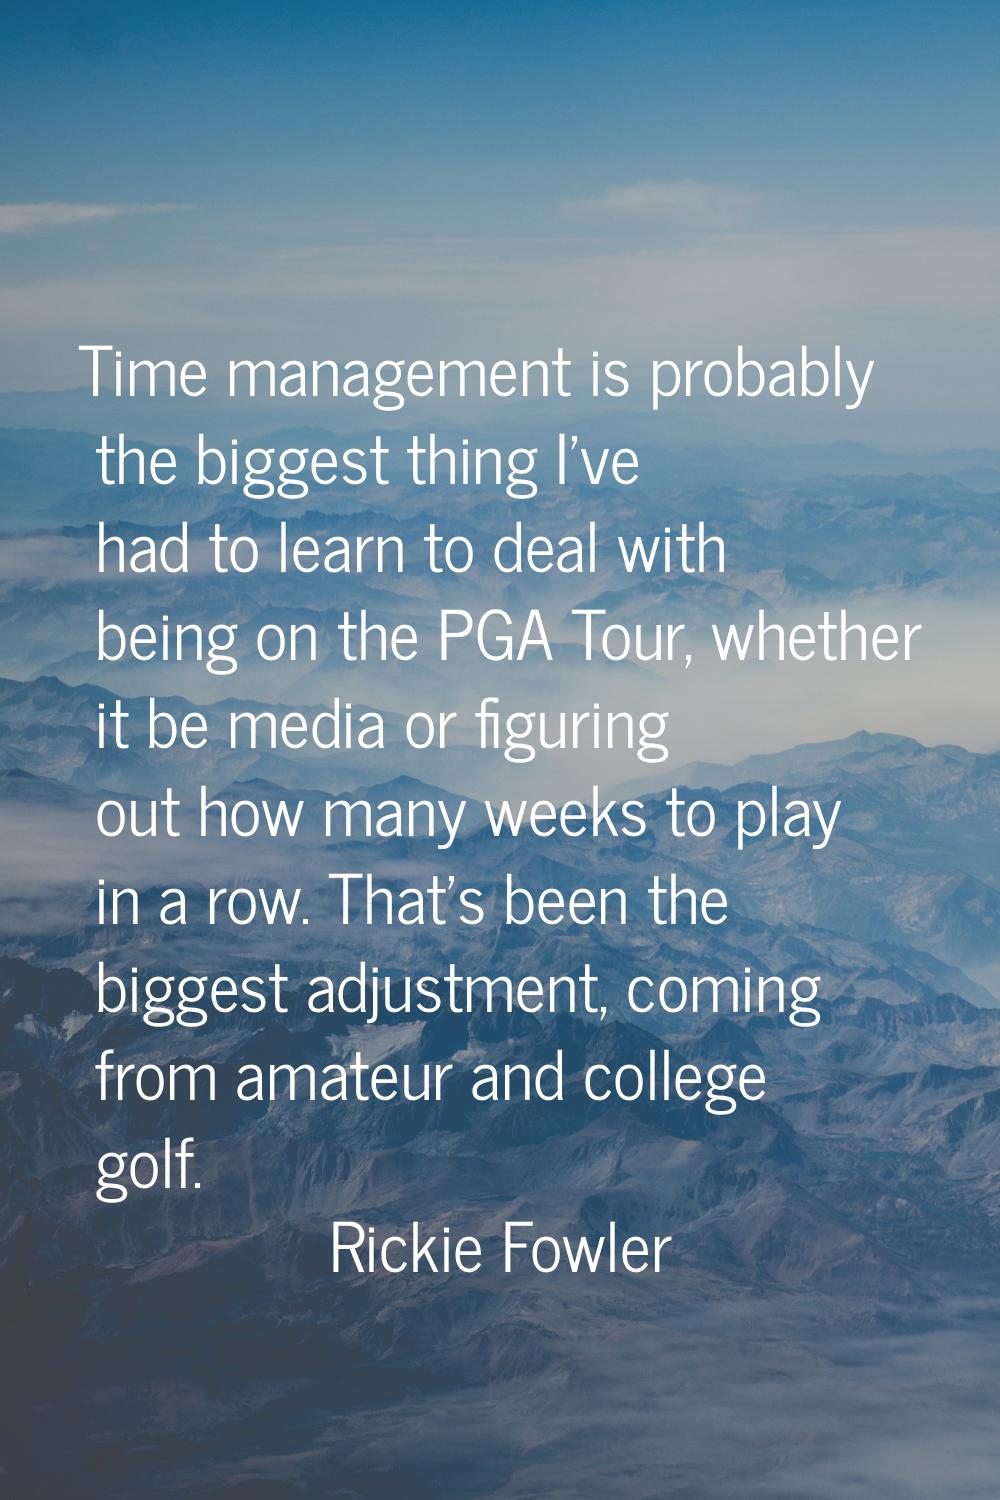 Time management is probably the biggest thing I've had to learn to deal with being on the PGA Tour,